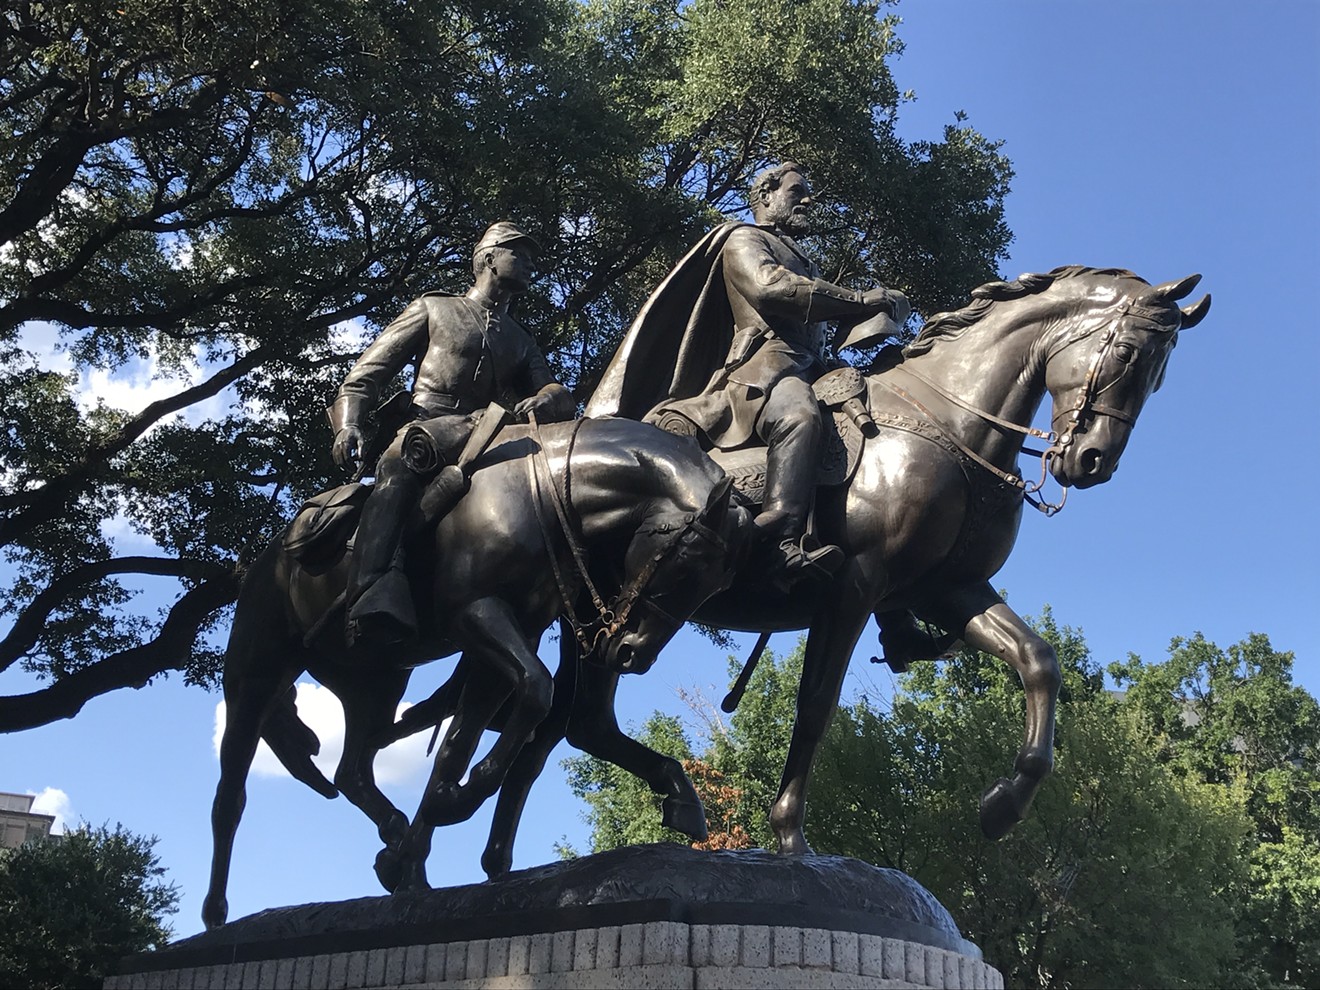 The Dallas City Council will vote Sept. 6 on the removal of Lee Park's Robert E. Lee statue.